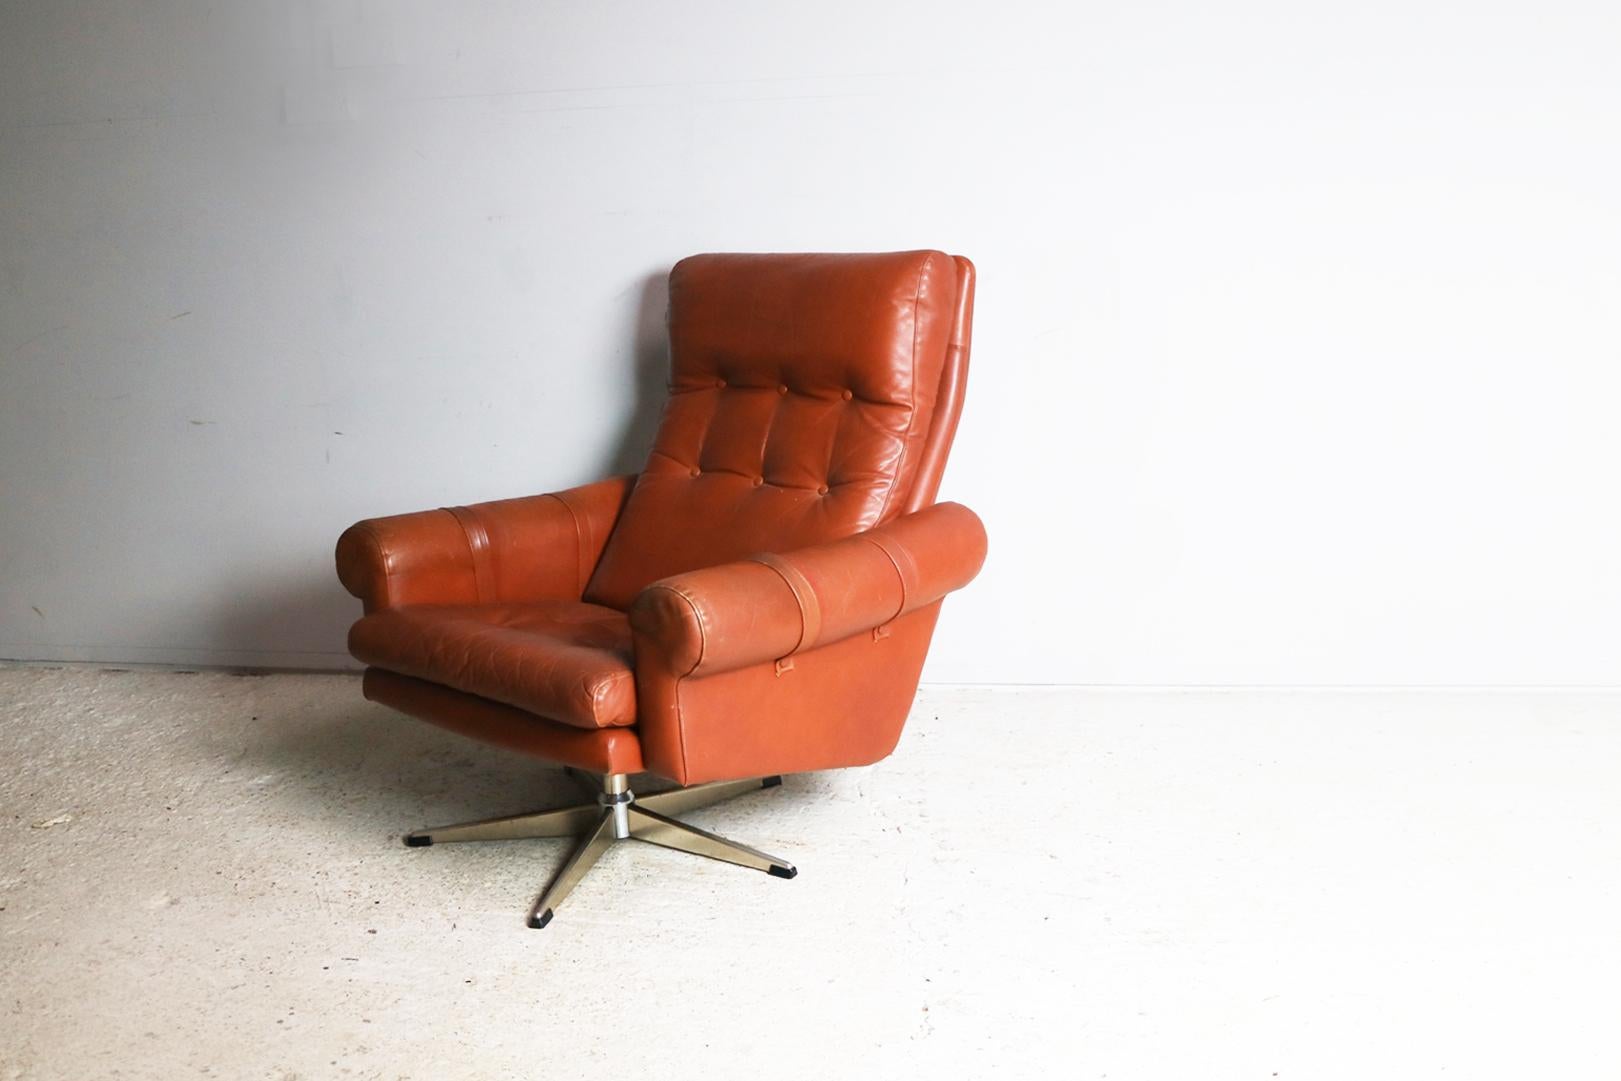 Plated 1970s Danish Midcentury Leather Swivel Armchair For Sale